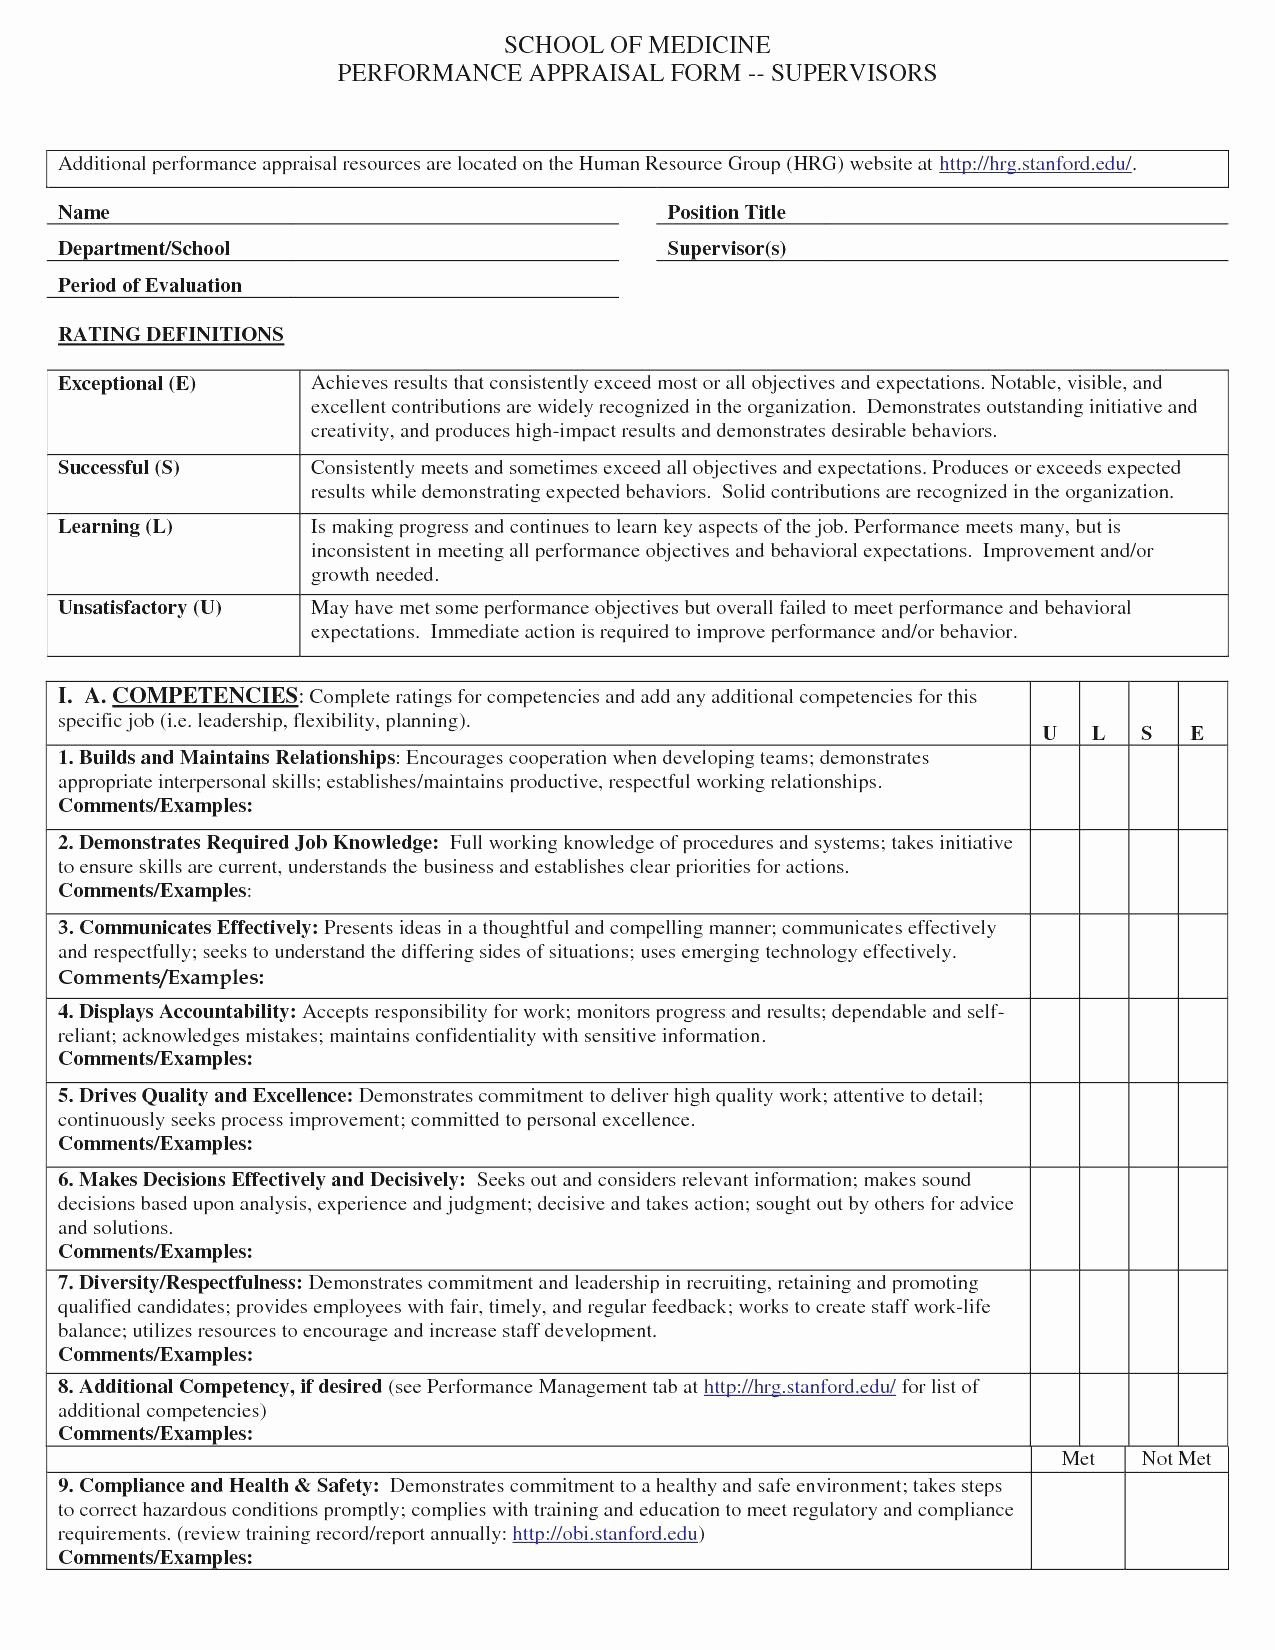 Resource Evaluation Template Probationary Period Evaluation Report pertaining to Website Evaluation Report Template